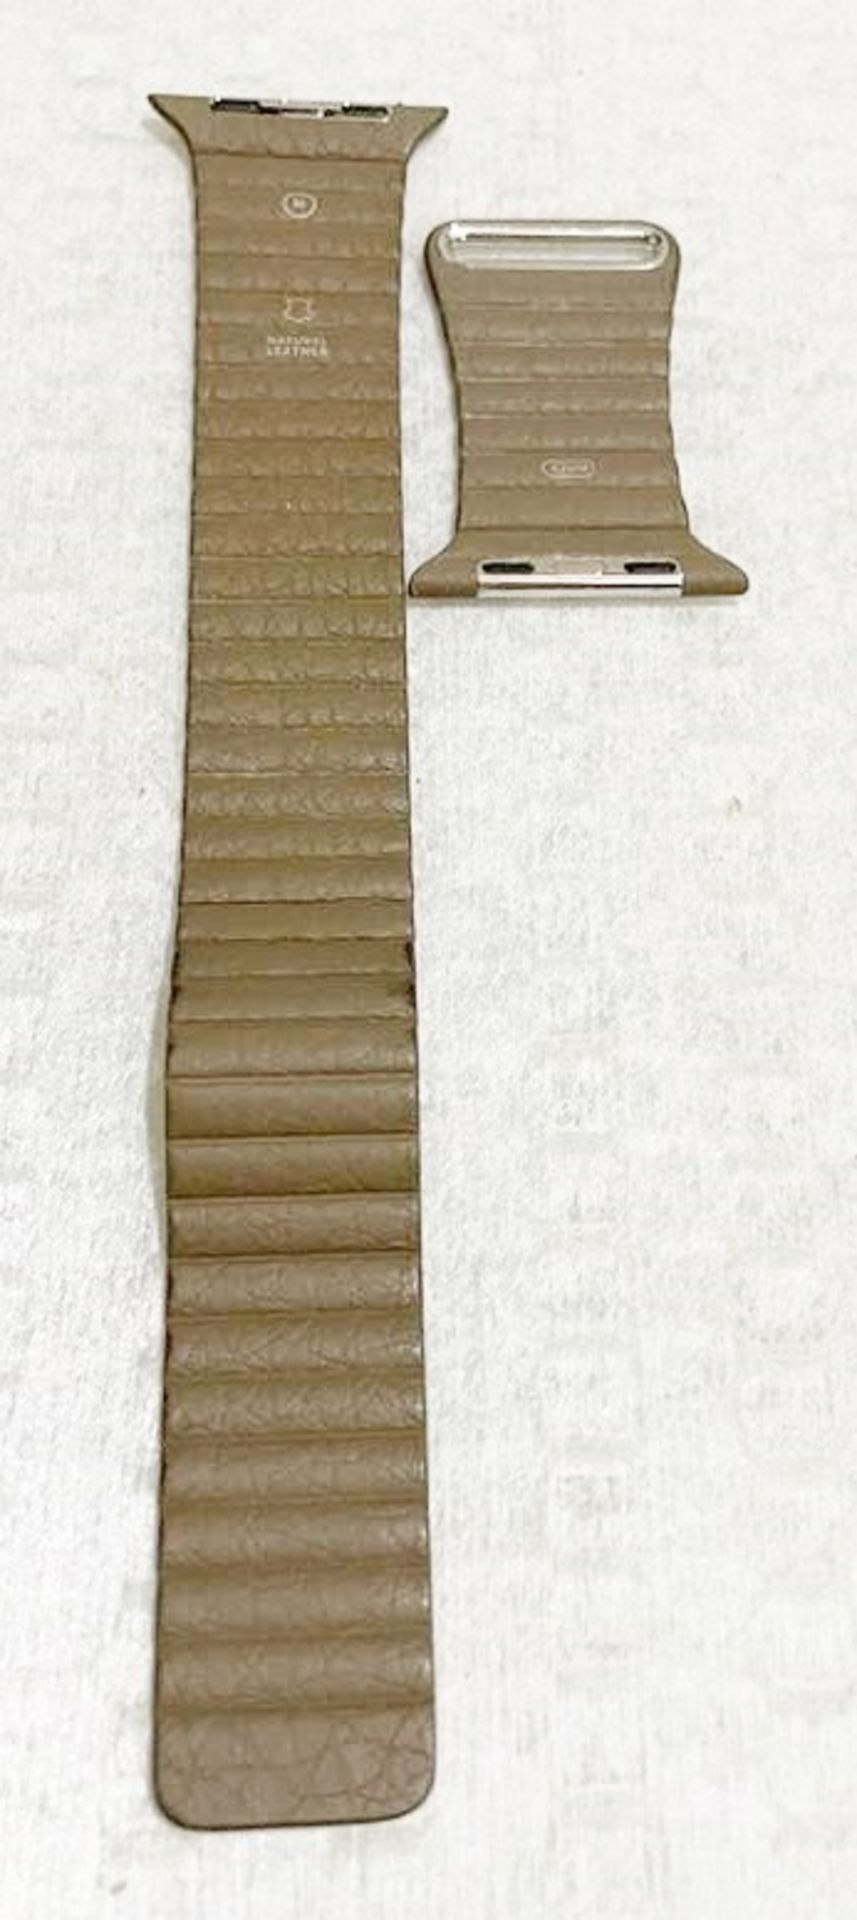 1 x APPLE WATCH Natural Leather 42mm Watch Strap - No VAT on the Hammer - CL712 - Ref: MPC852  - - Image 4 of 4